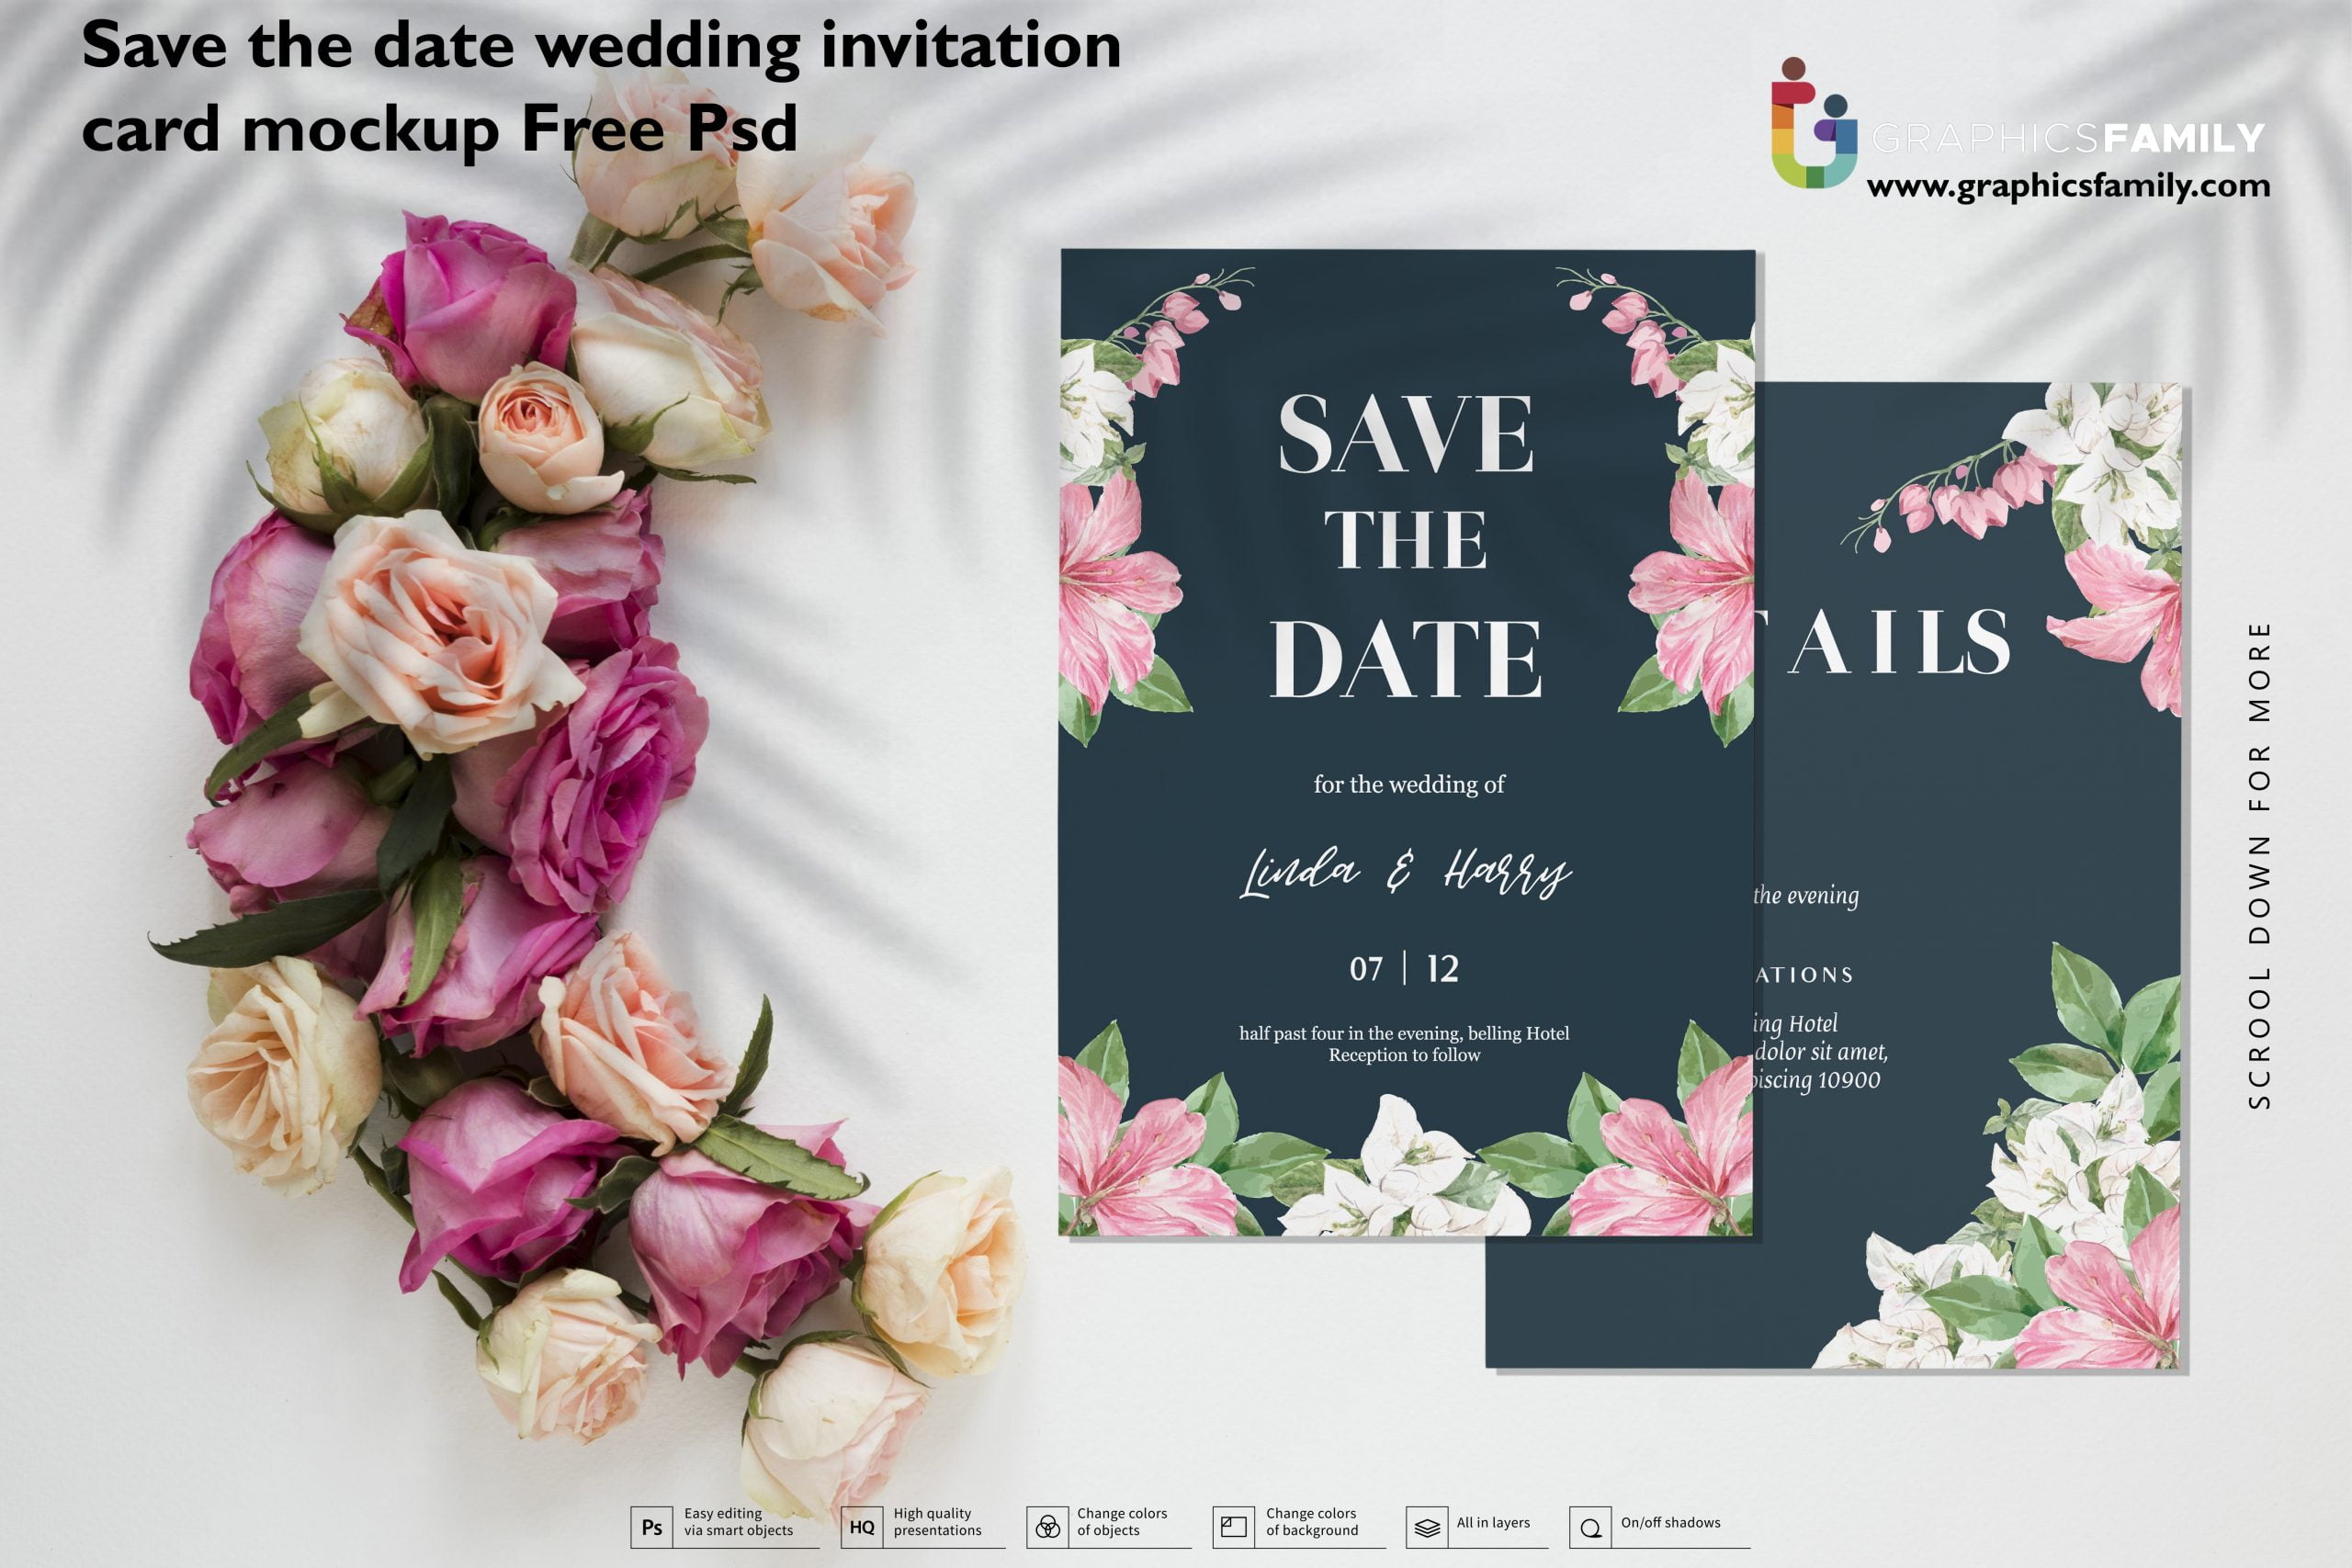 save-the-date-wedding-invitation-card-mockup-free-psd-graphicsfamily